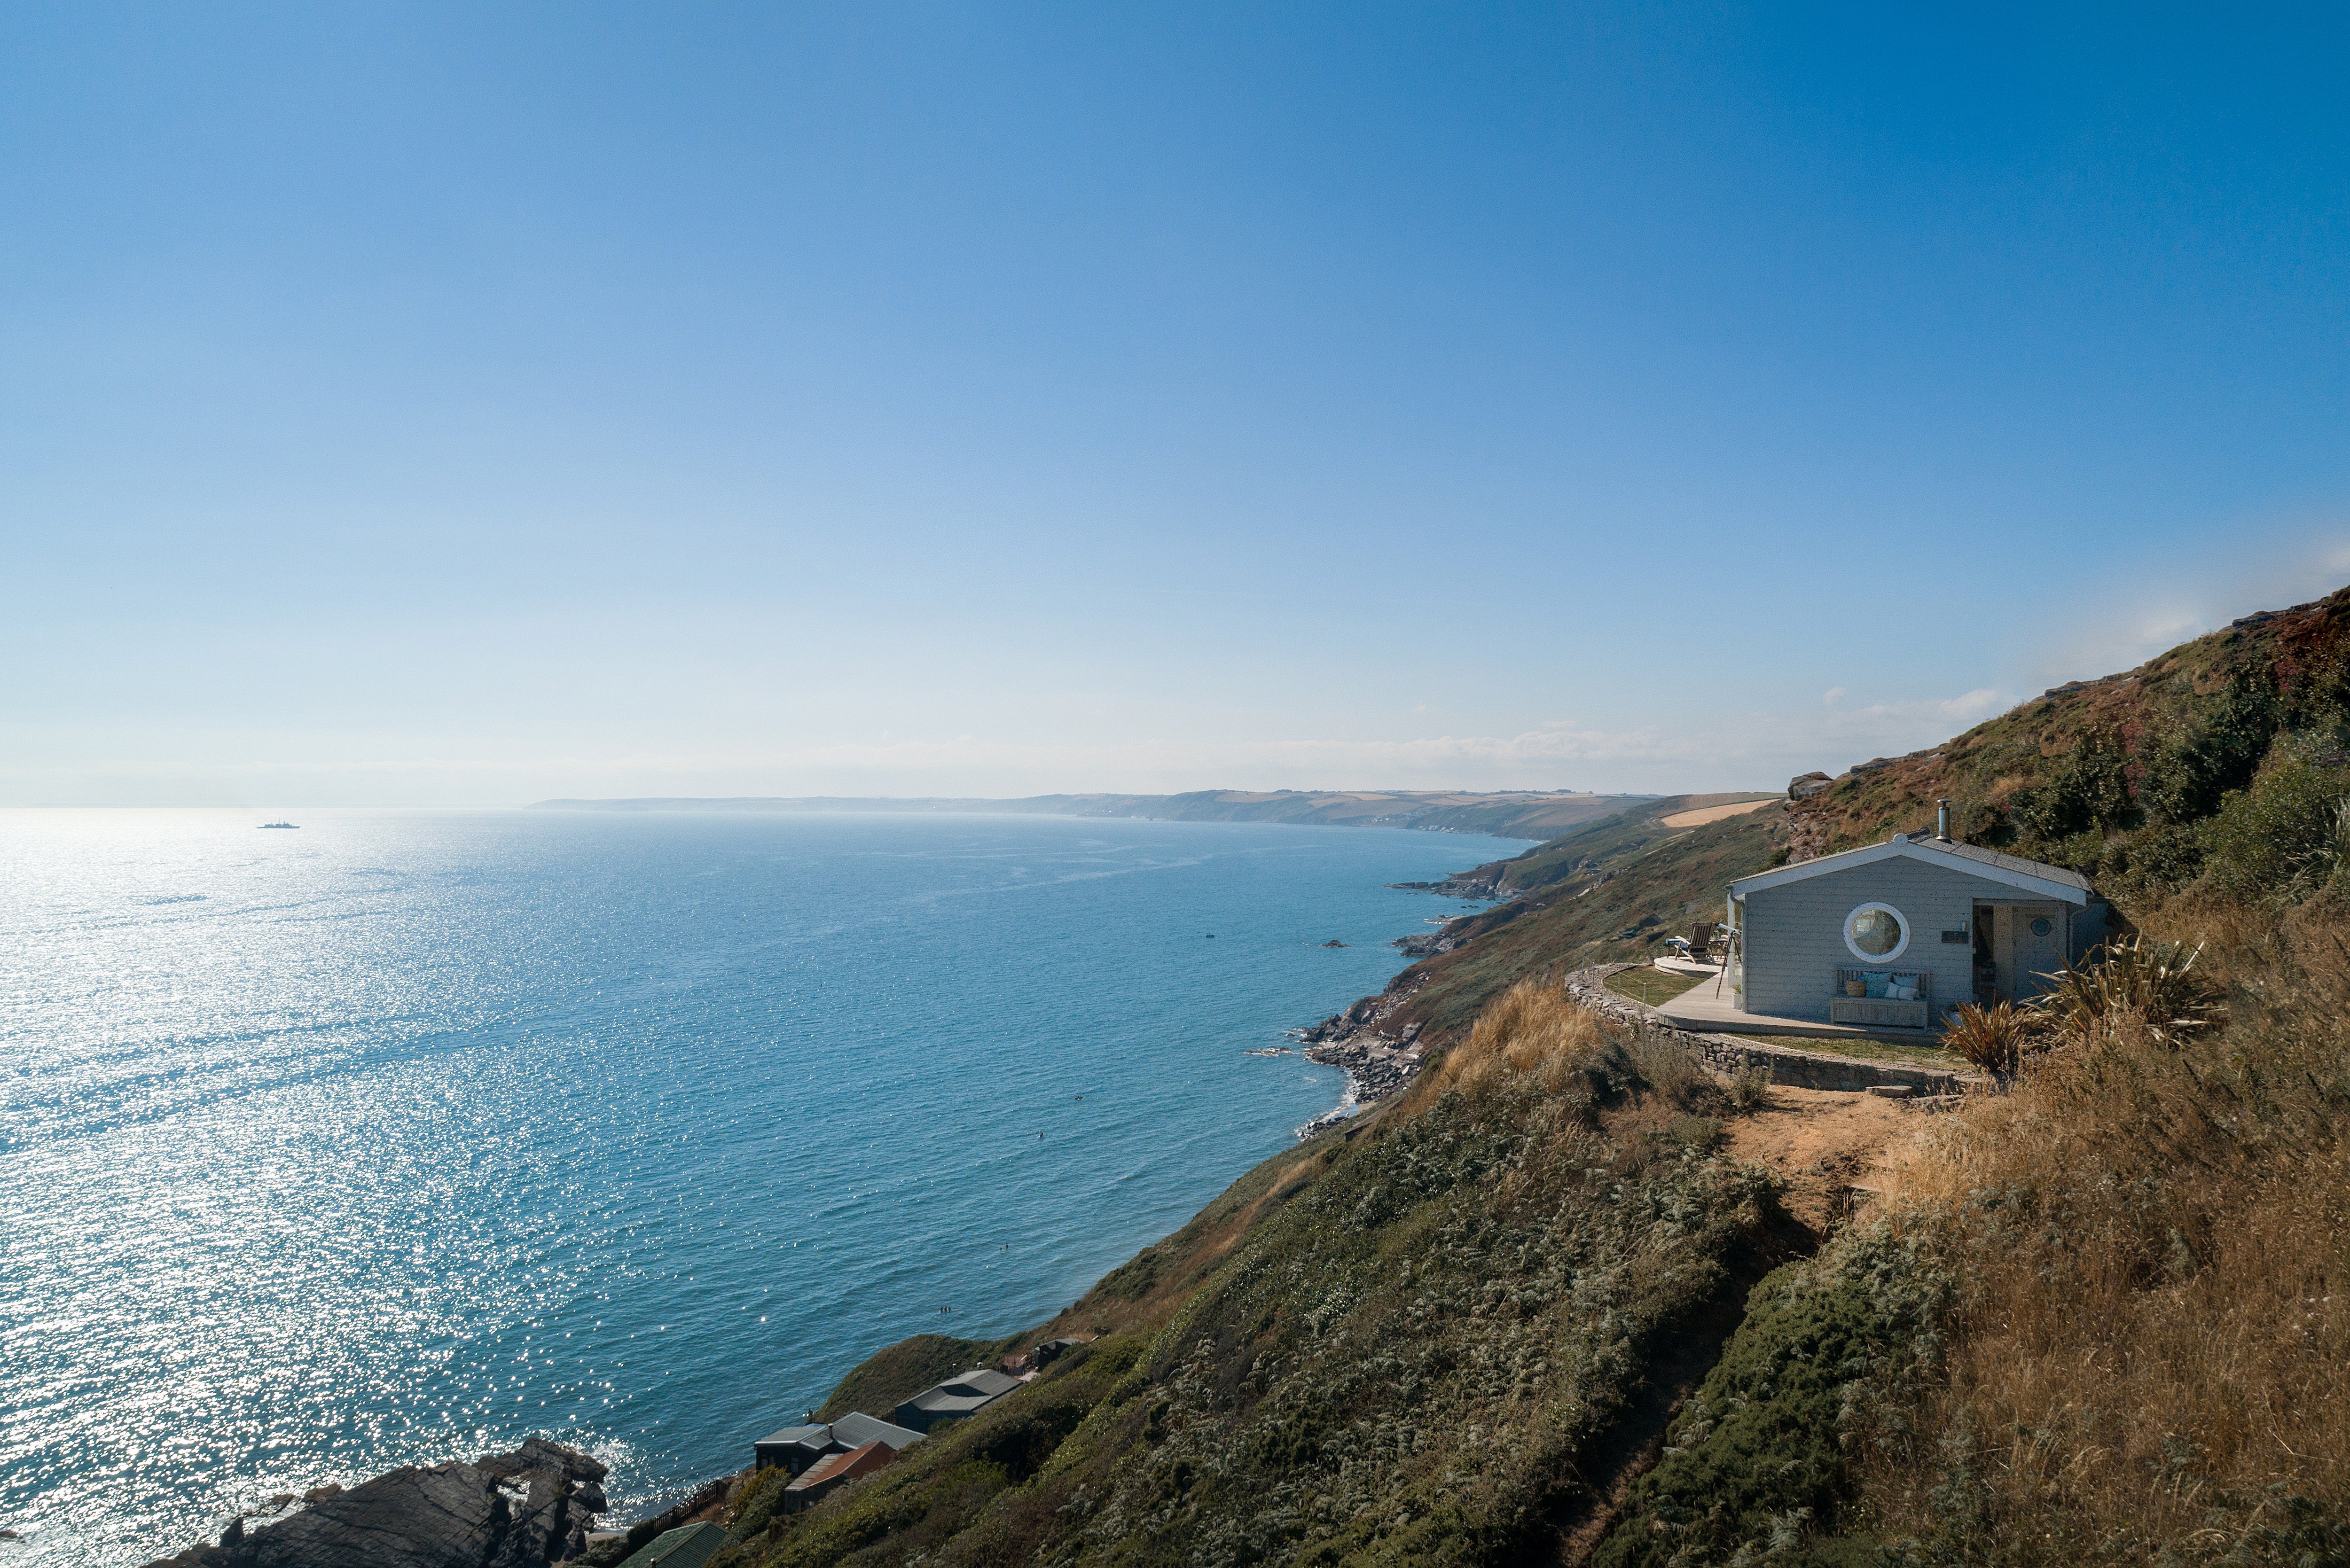 This chic beach hut feels like it’s at the edge of the world